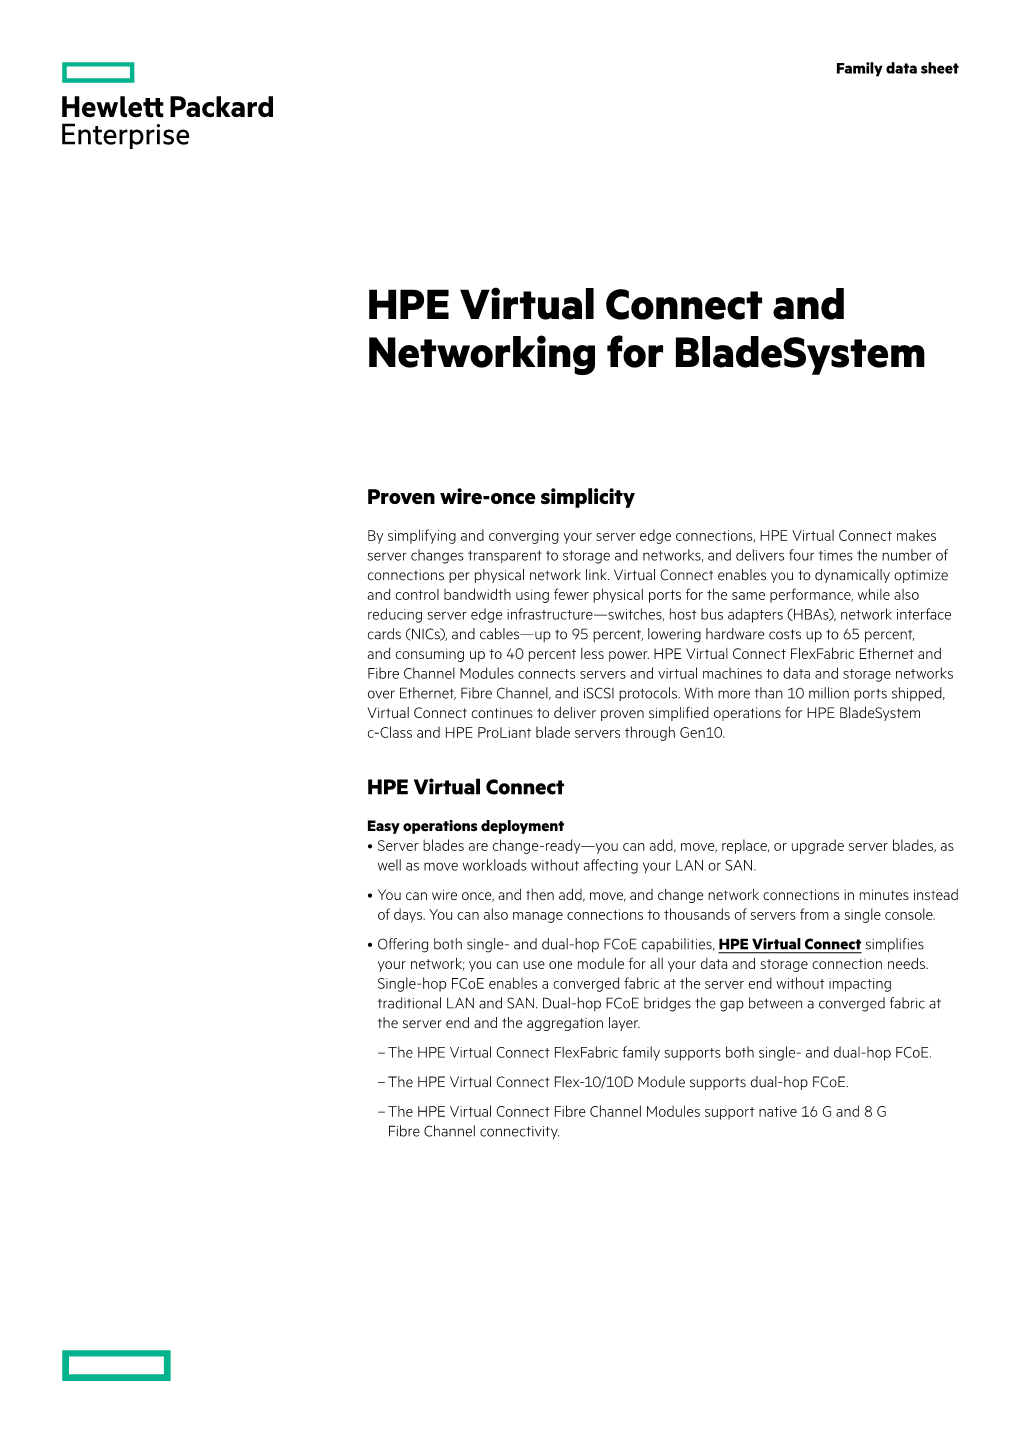 HPE Virtual Connect and Networking for Bladesystem Family Data Sheet